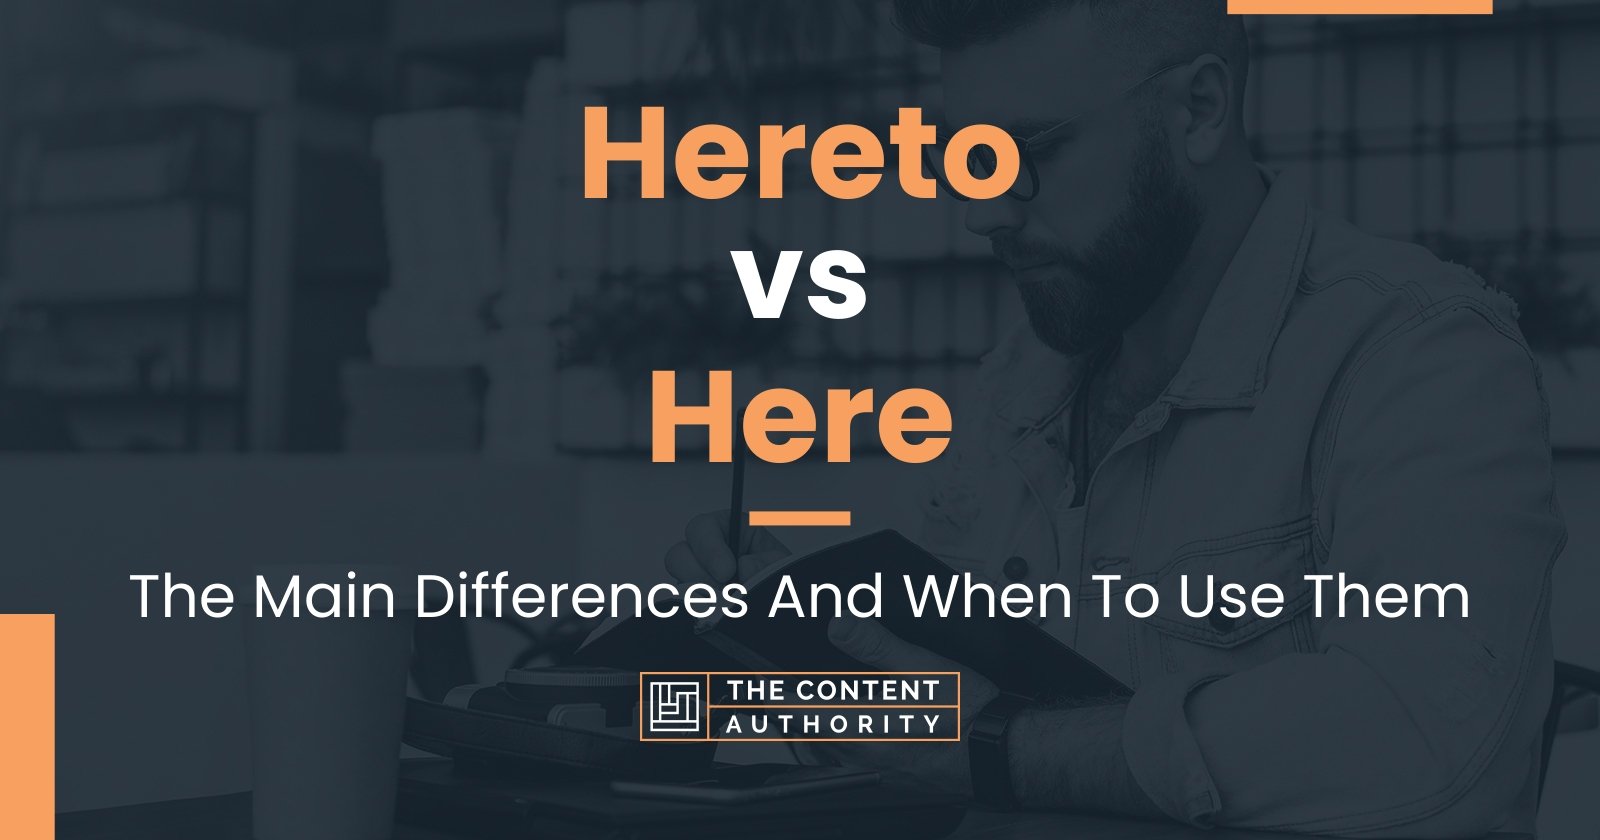 Hereto vs Here: The Main Differences And When To Use Them